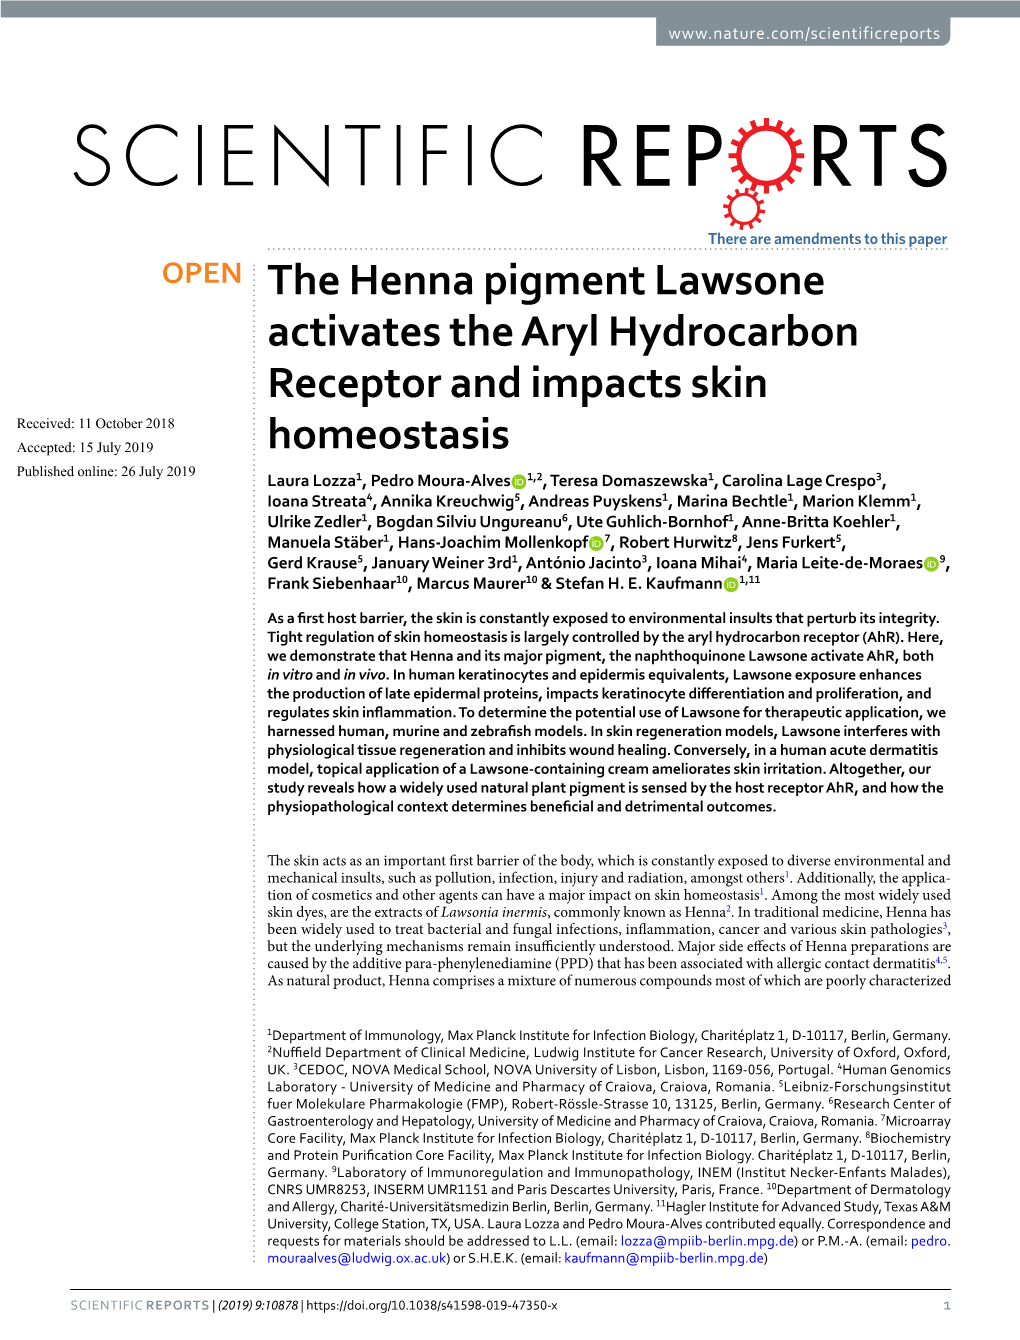 The Henna Pigment Lawsone Activates the Aryl Hydrocarbon Receptor